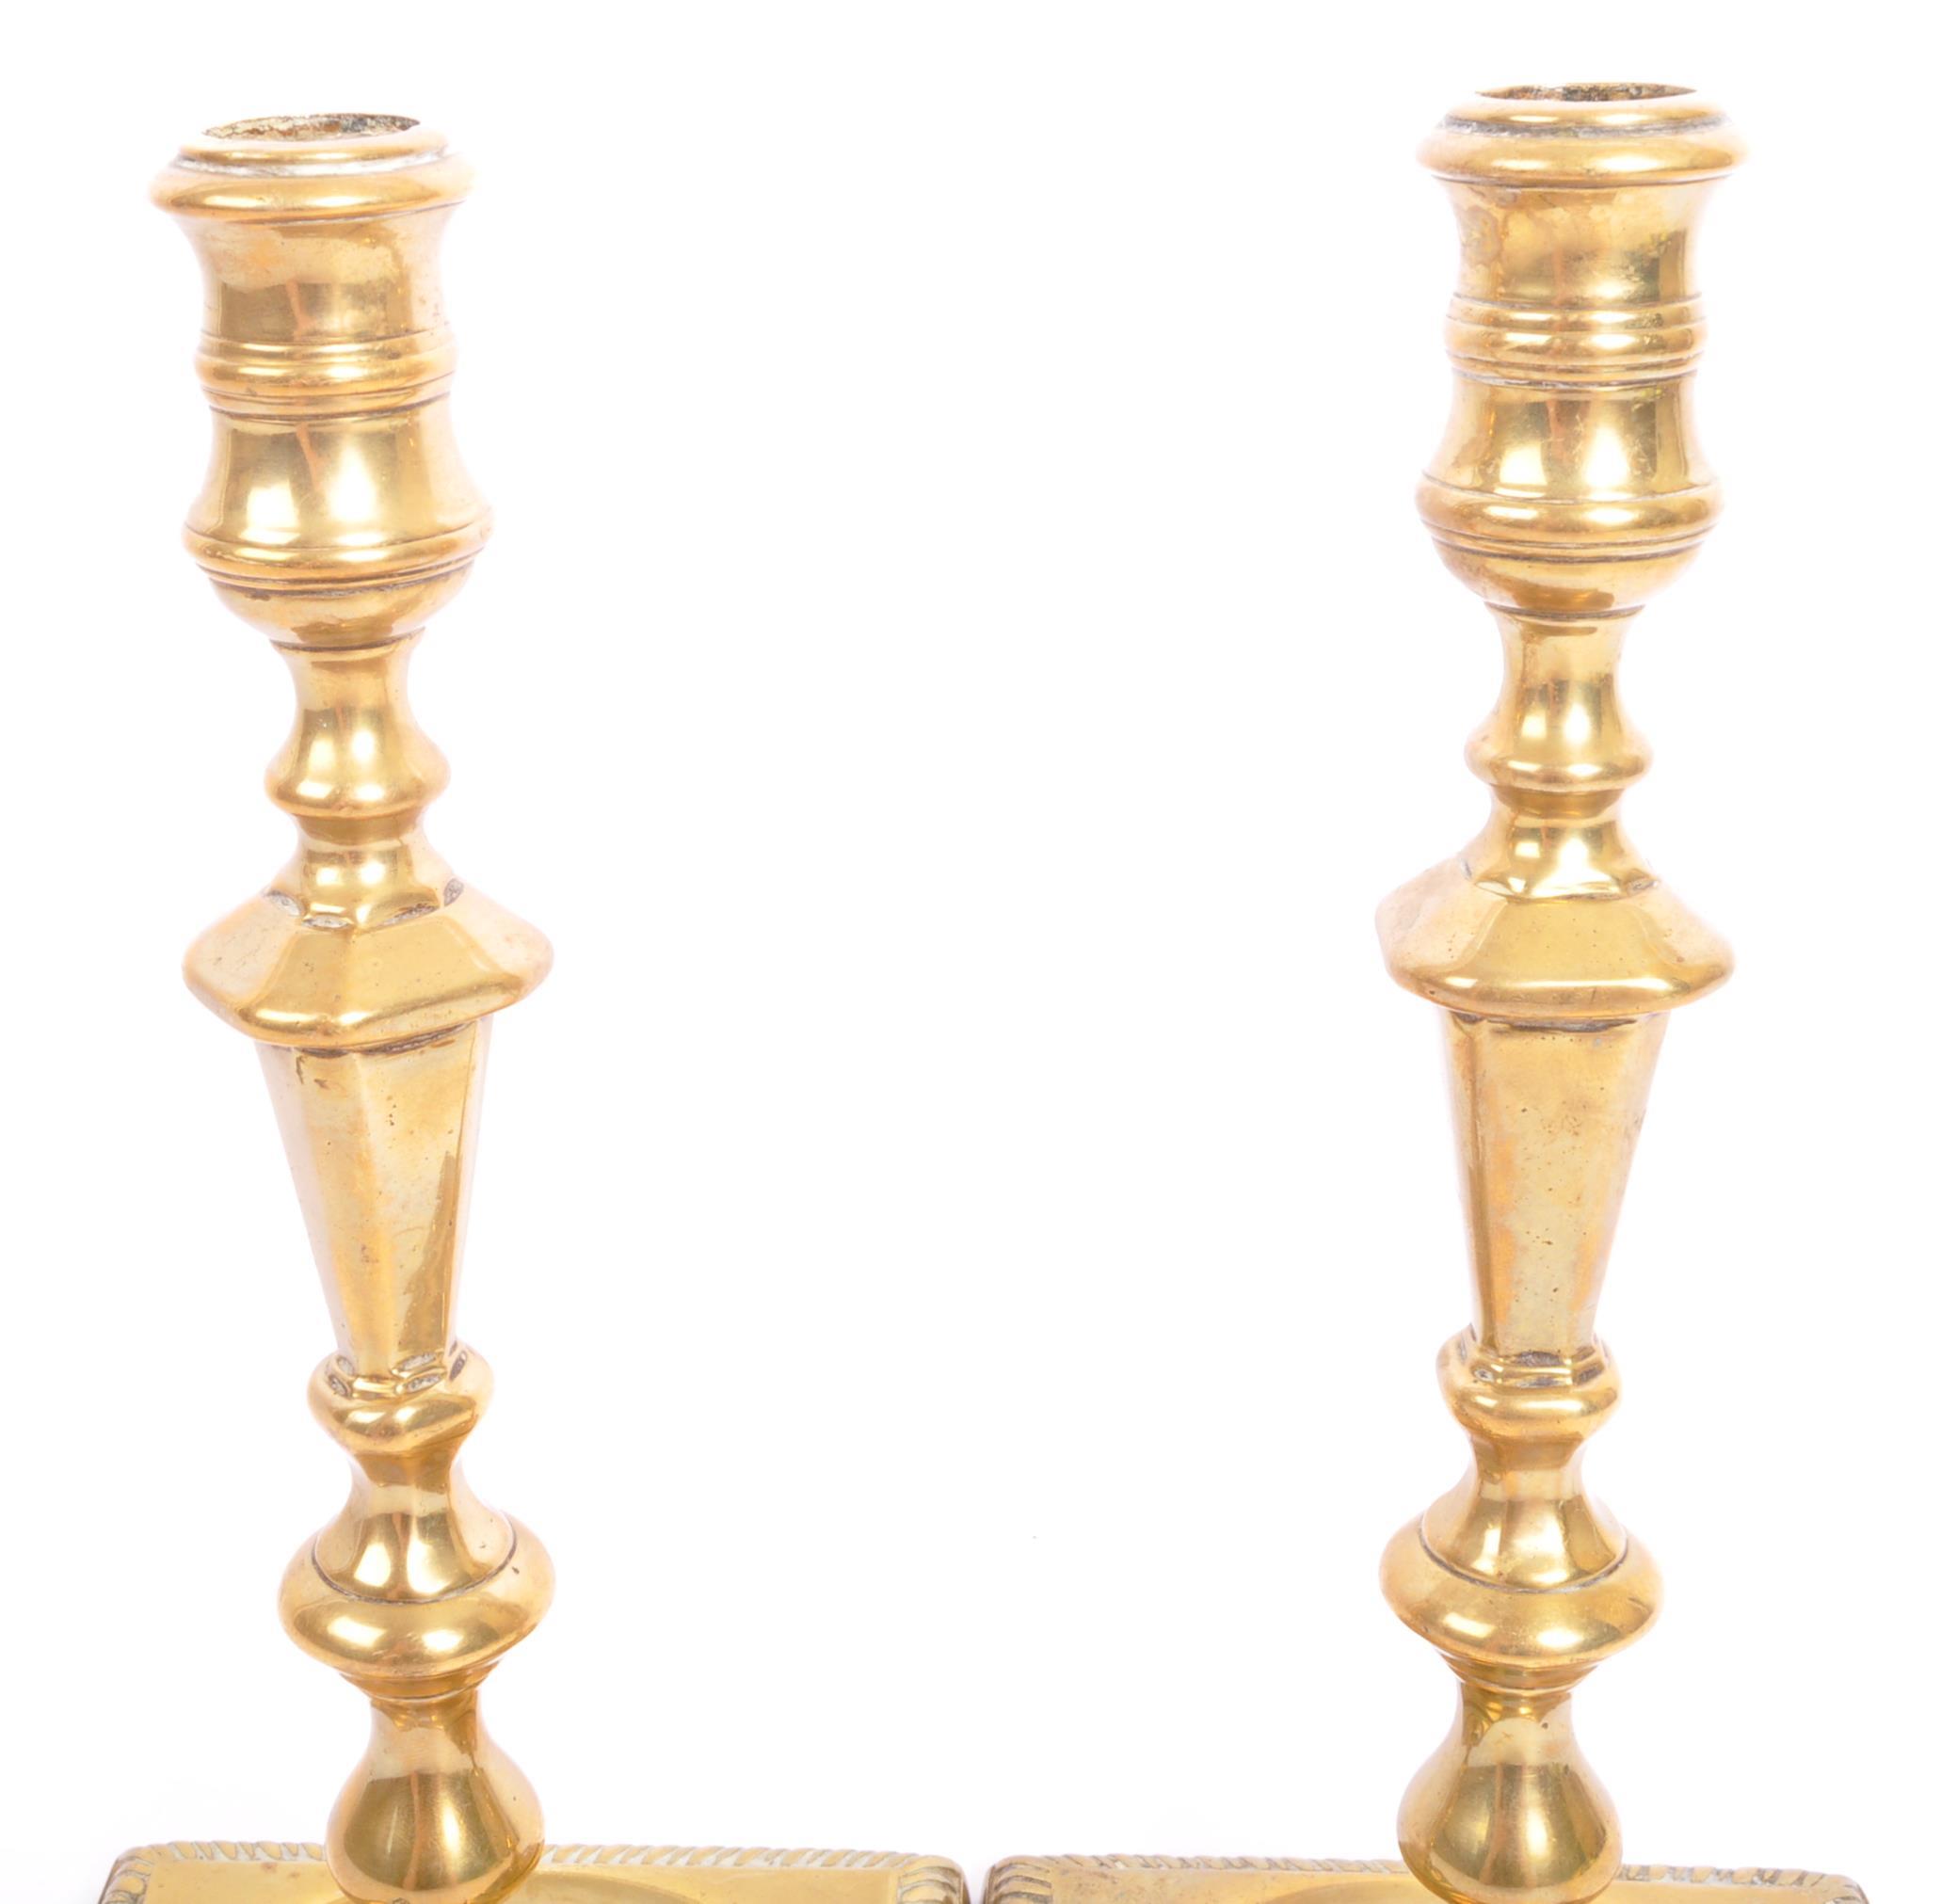 PAIR OF GEORGE III EARLY 19TH CENTURY BRASS CANDLE HOLDERS - Image 4 of 6